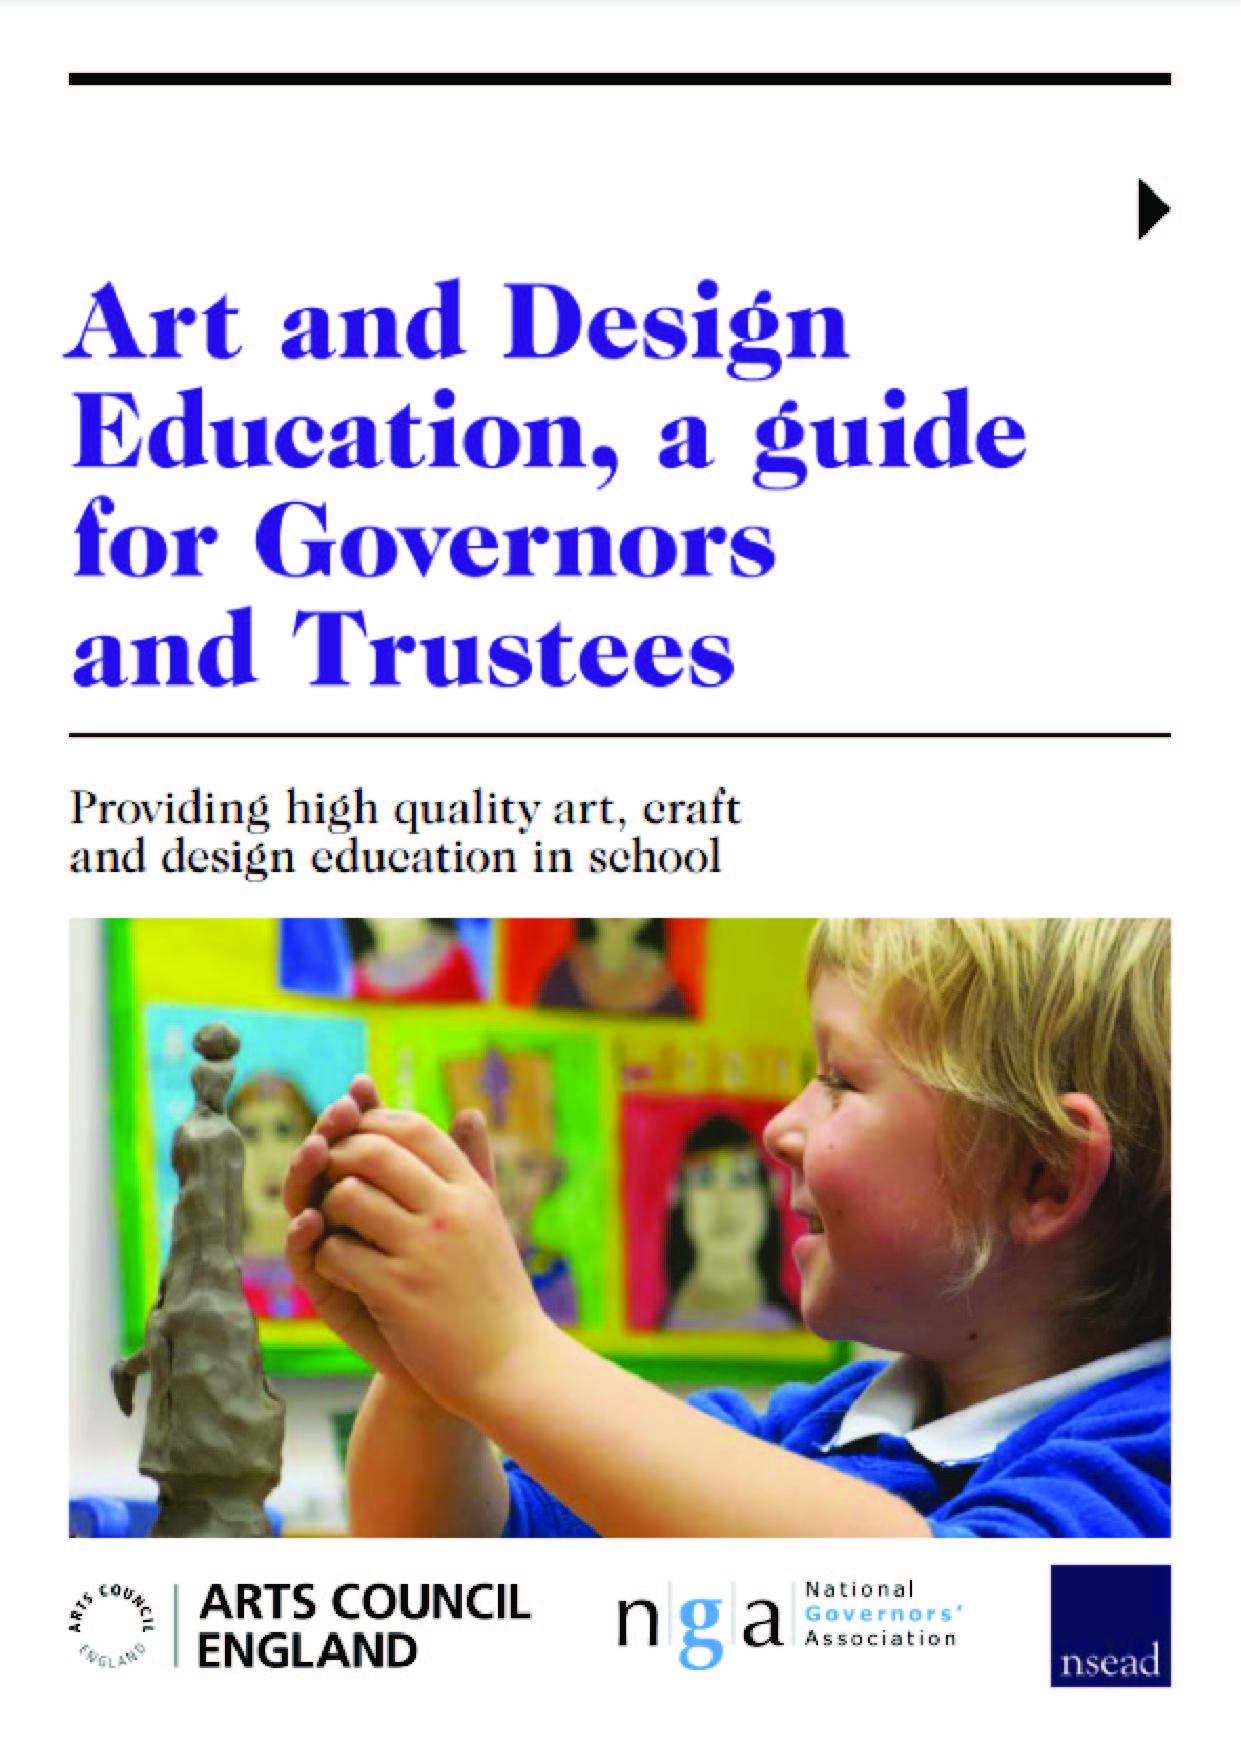 Art and Design Education for Governors and Trustees